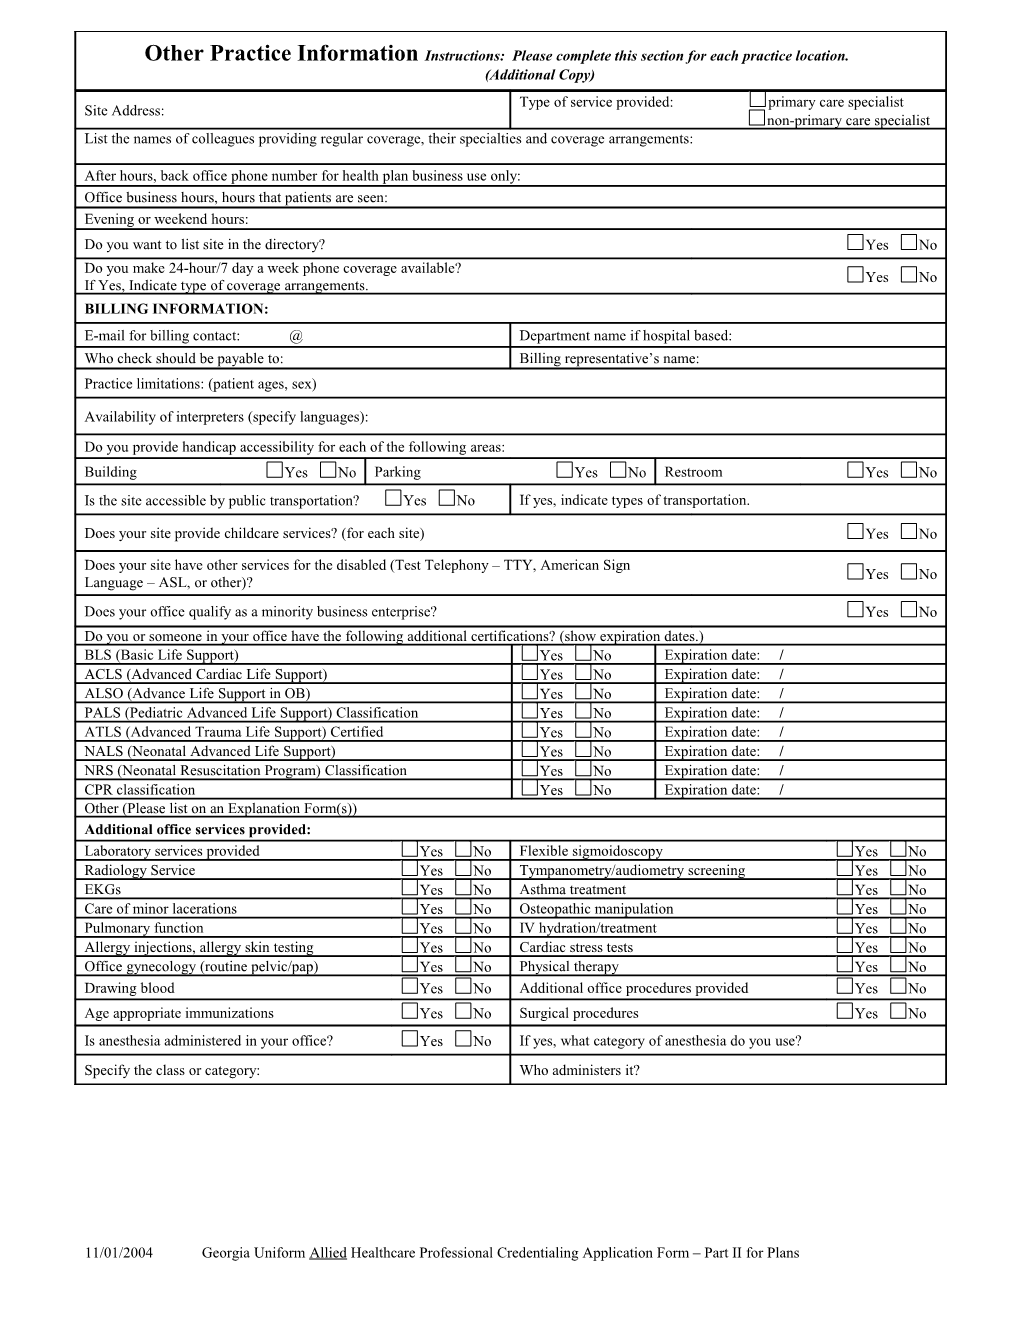 11/01/2004 Georgia Uniform Allied Healthcare Professional Credentialing Application Form